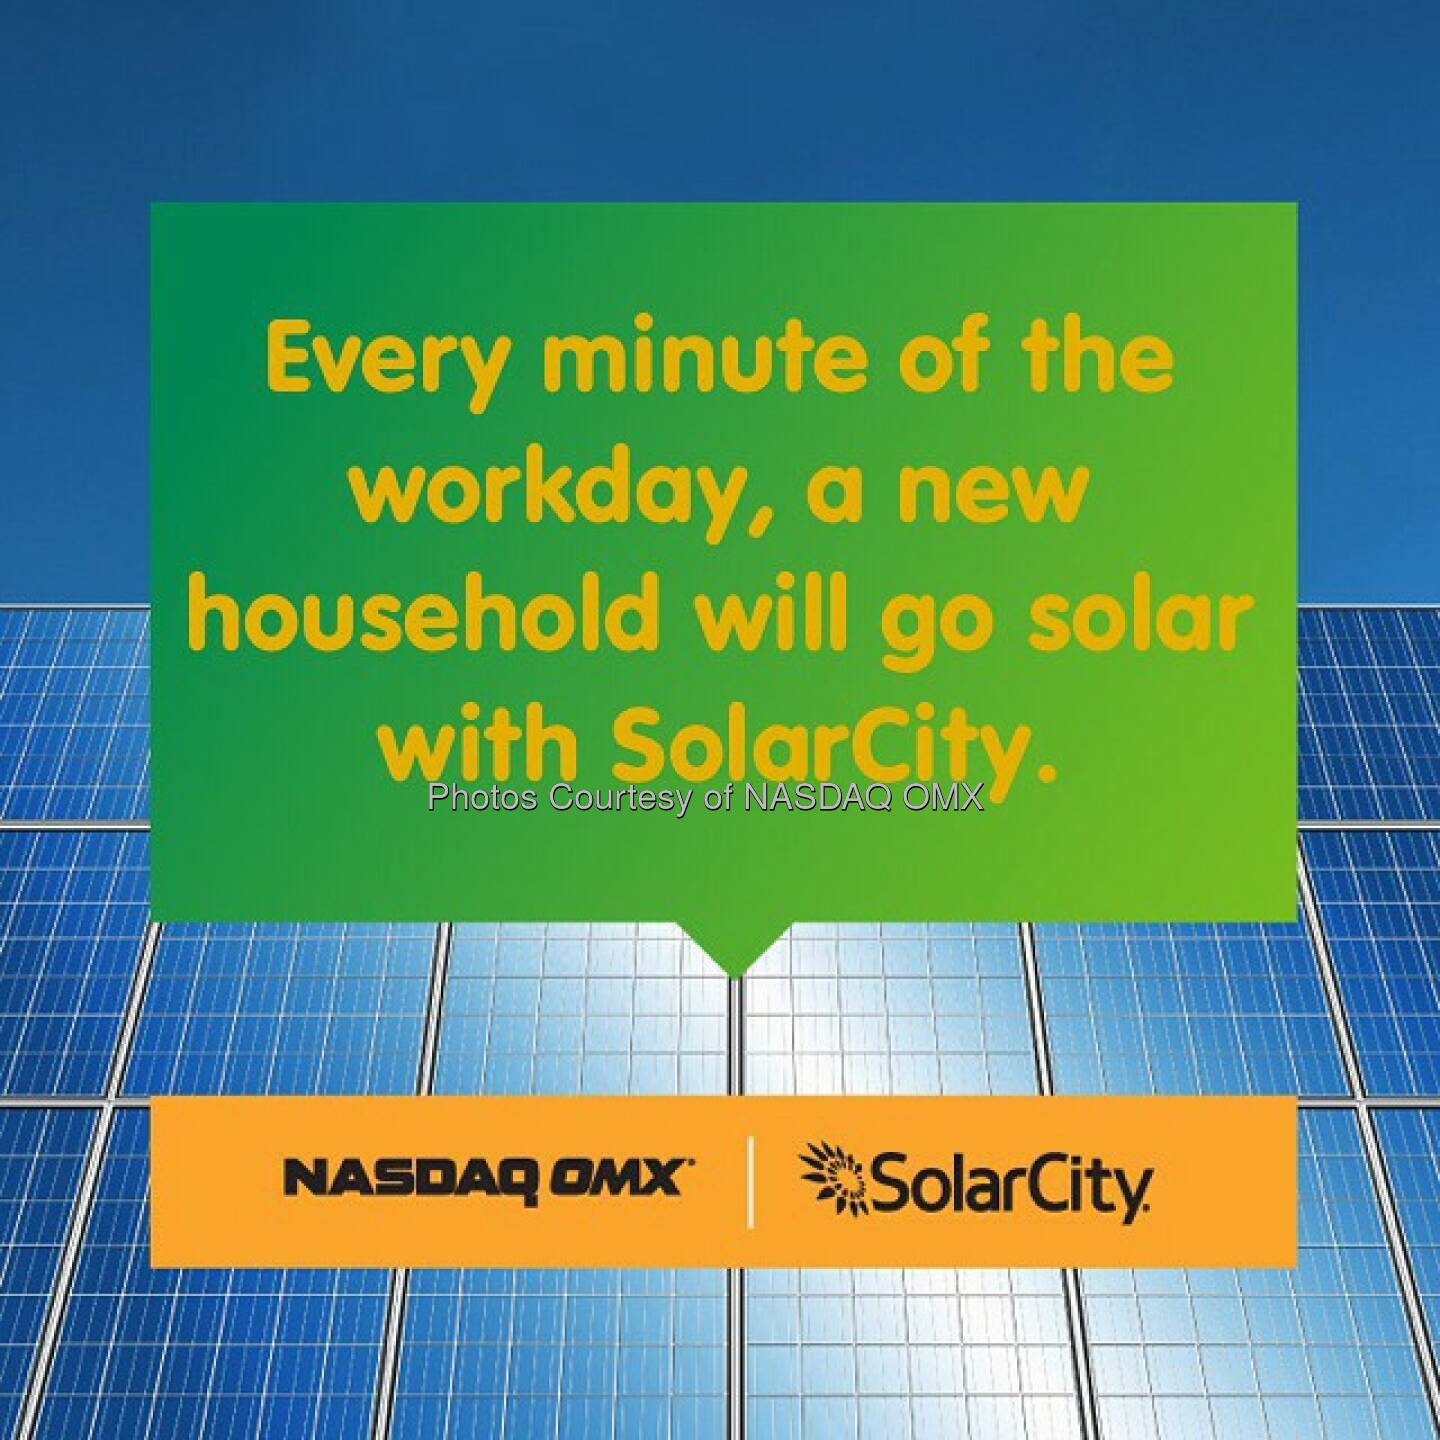 #SolarFacts from @SolarCity at #InsideEnergy #sustainability #renewables  Source: http://facebook.com/NASDAQ